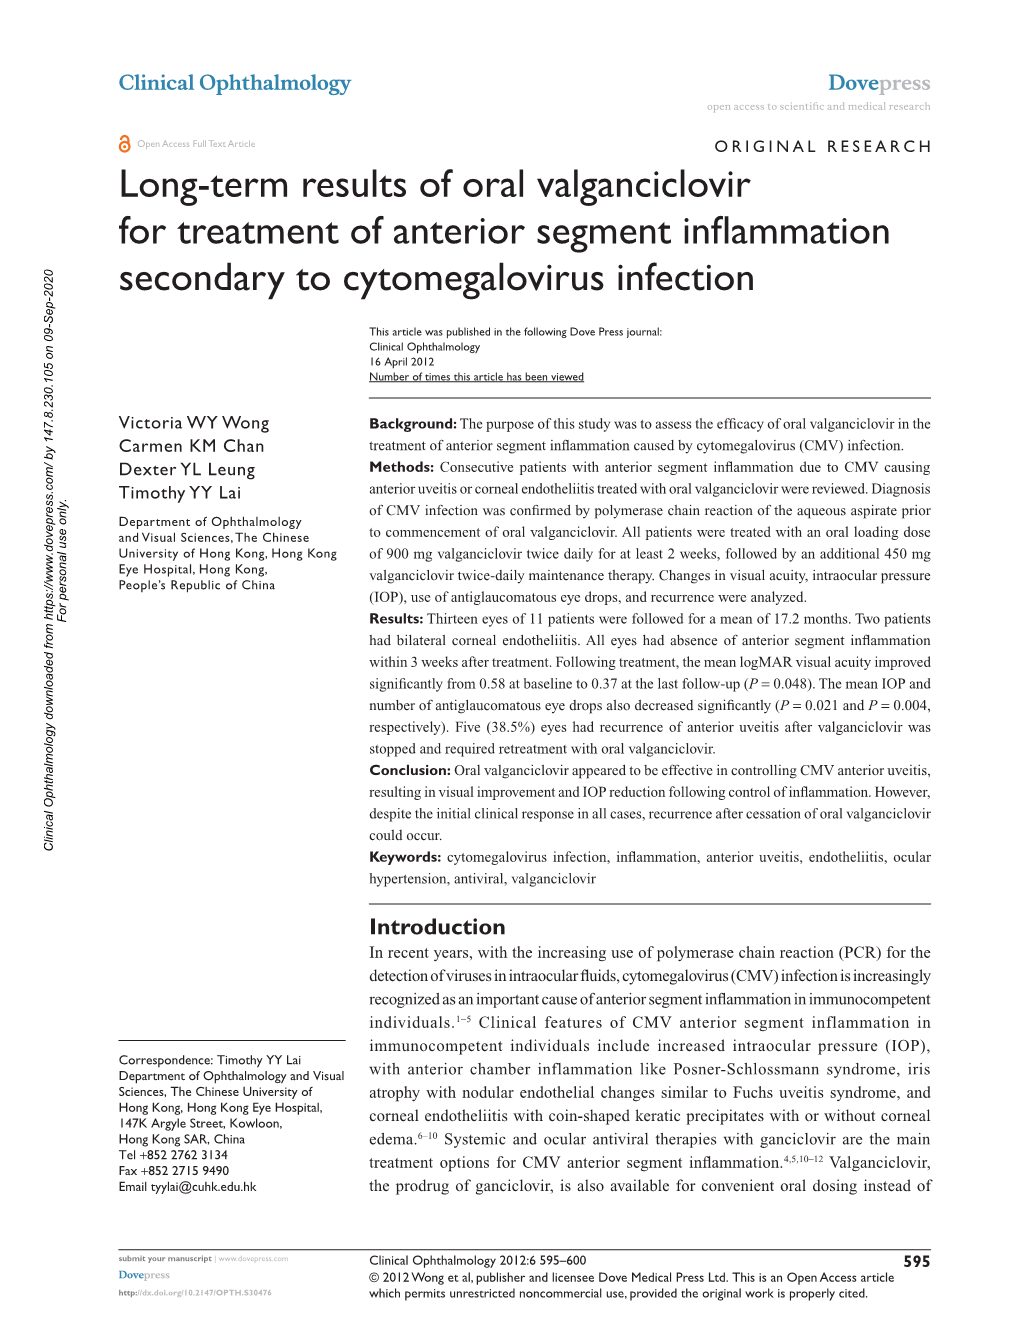 Long-Term Results of Oral Valganciclovir for Treatment of Anterior Segment Inflammation Secondary to Cytomegalovirus Infection